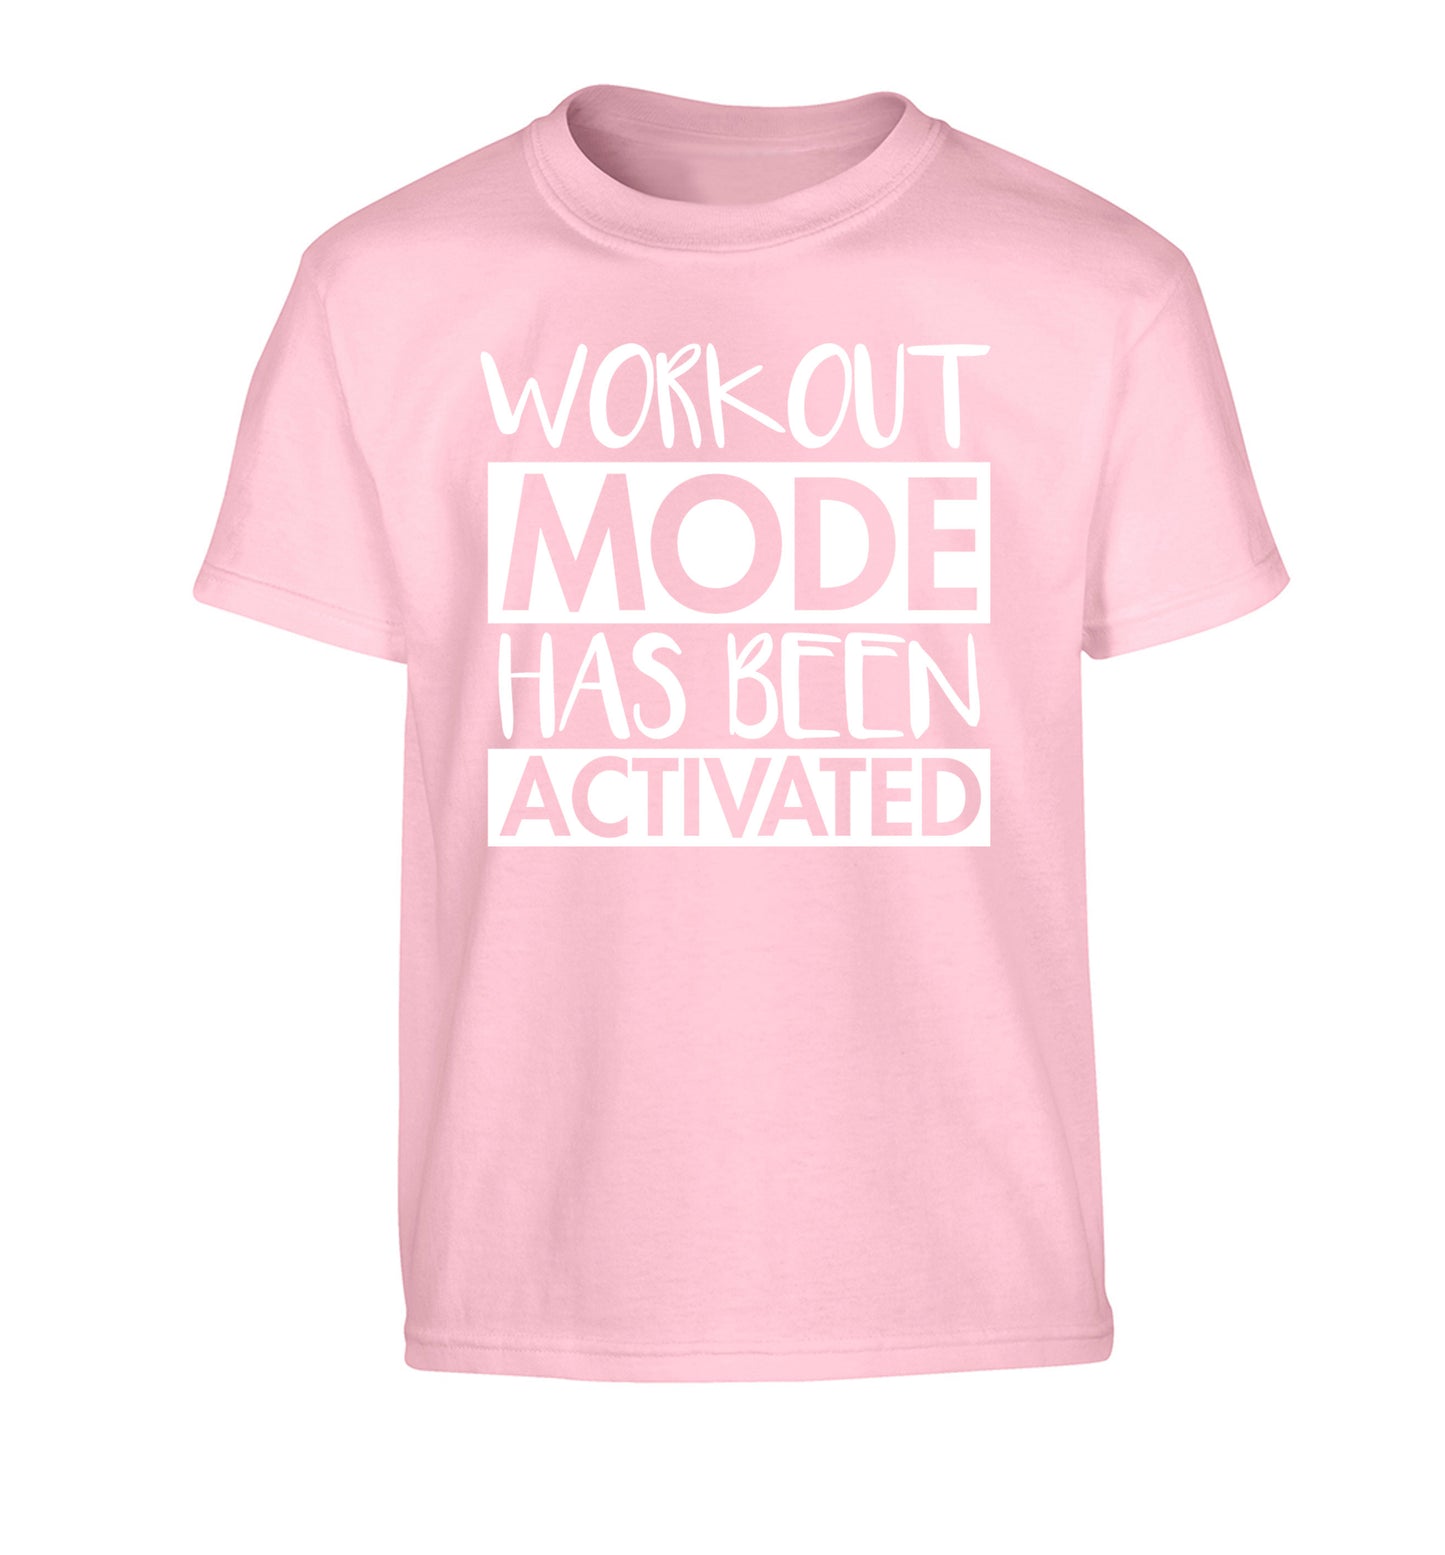 Workout mode has been activated Children's light pink Tshirt 12-14 Years